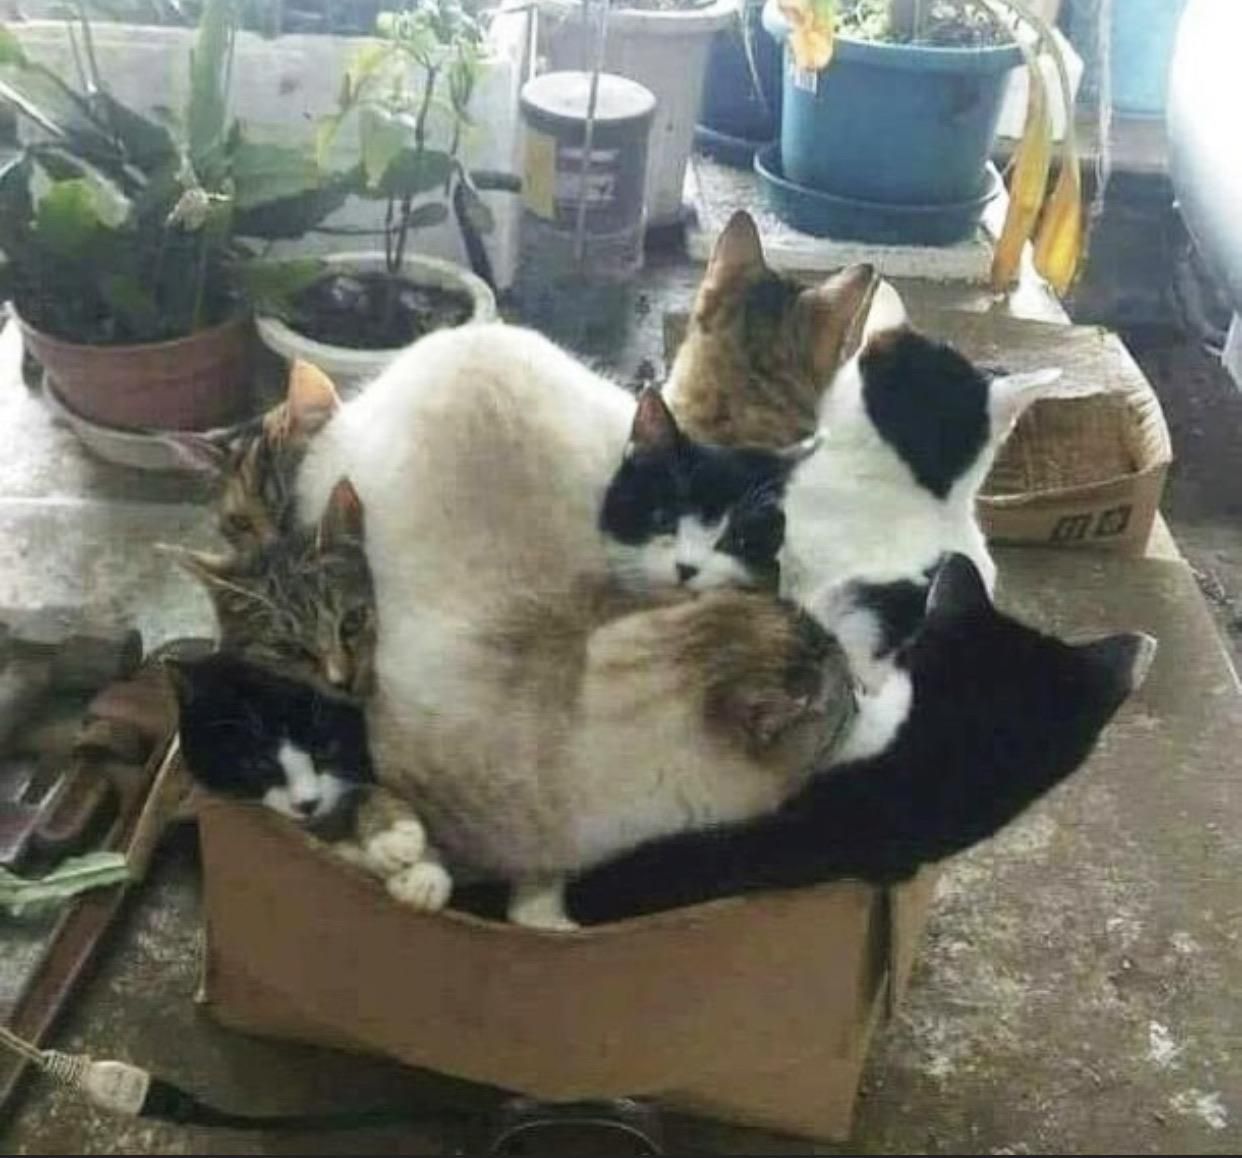 If one fits we all fit